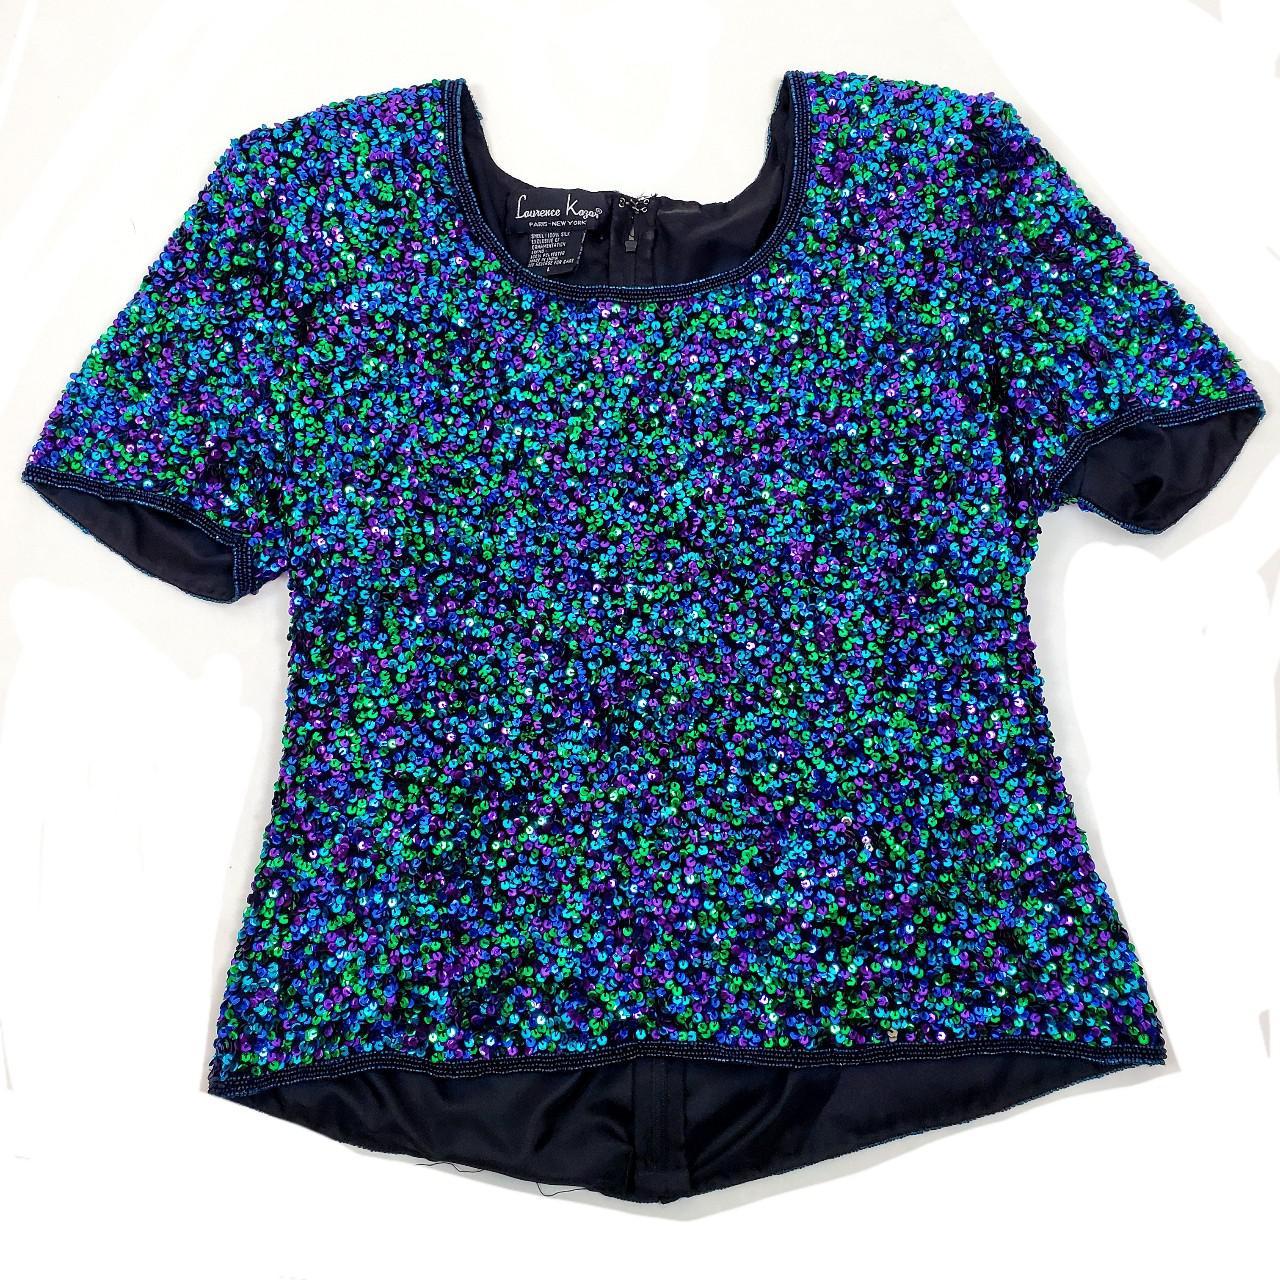 Product Image 1 - Party monster sequin blouse. 

Got